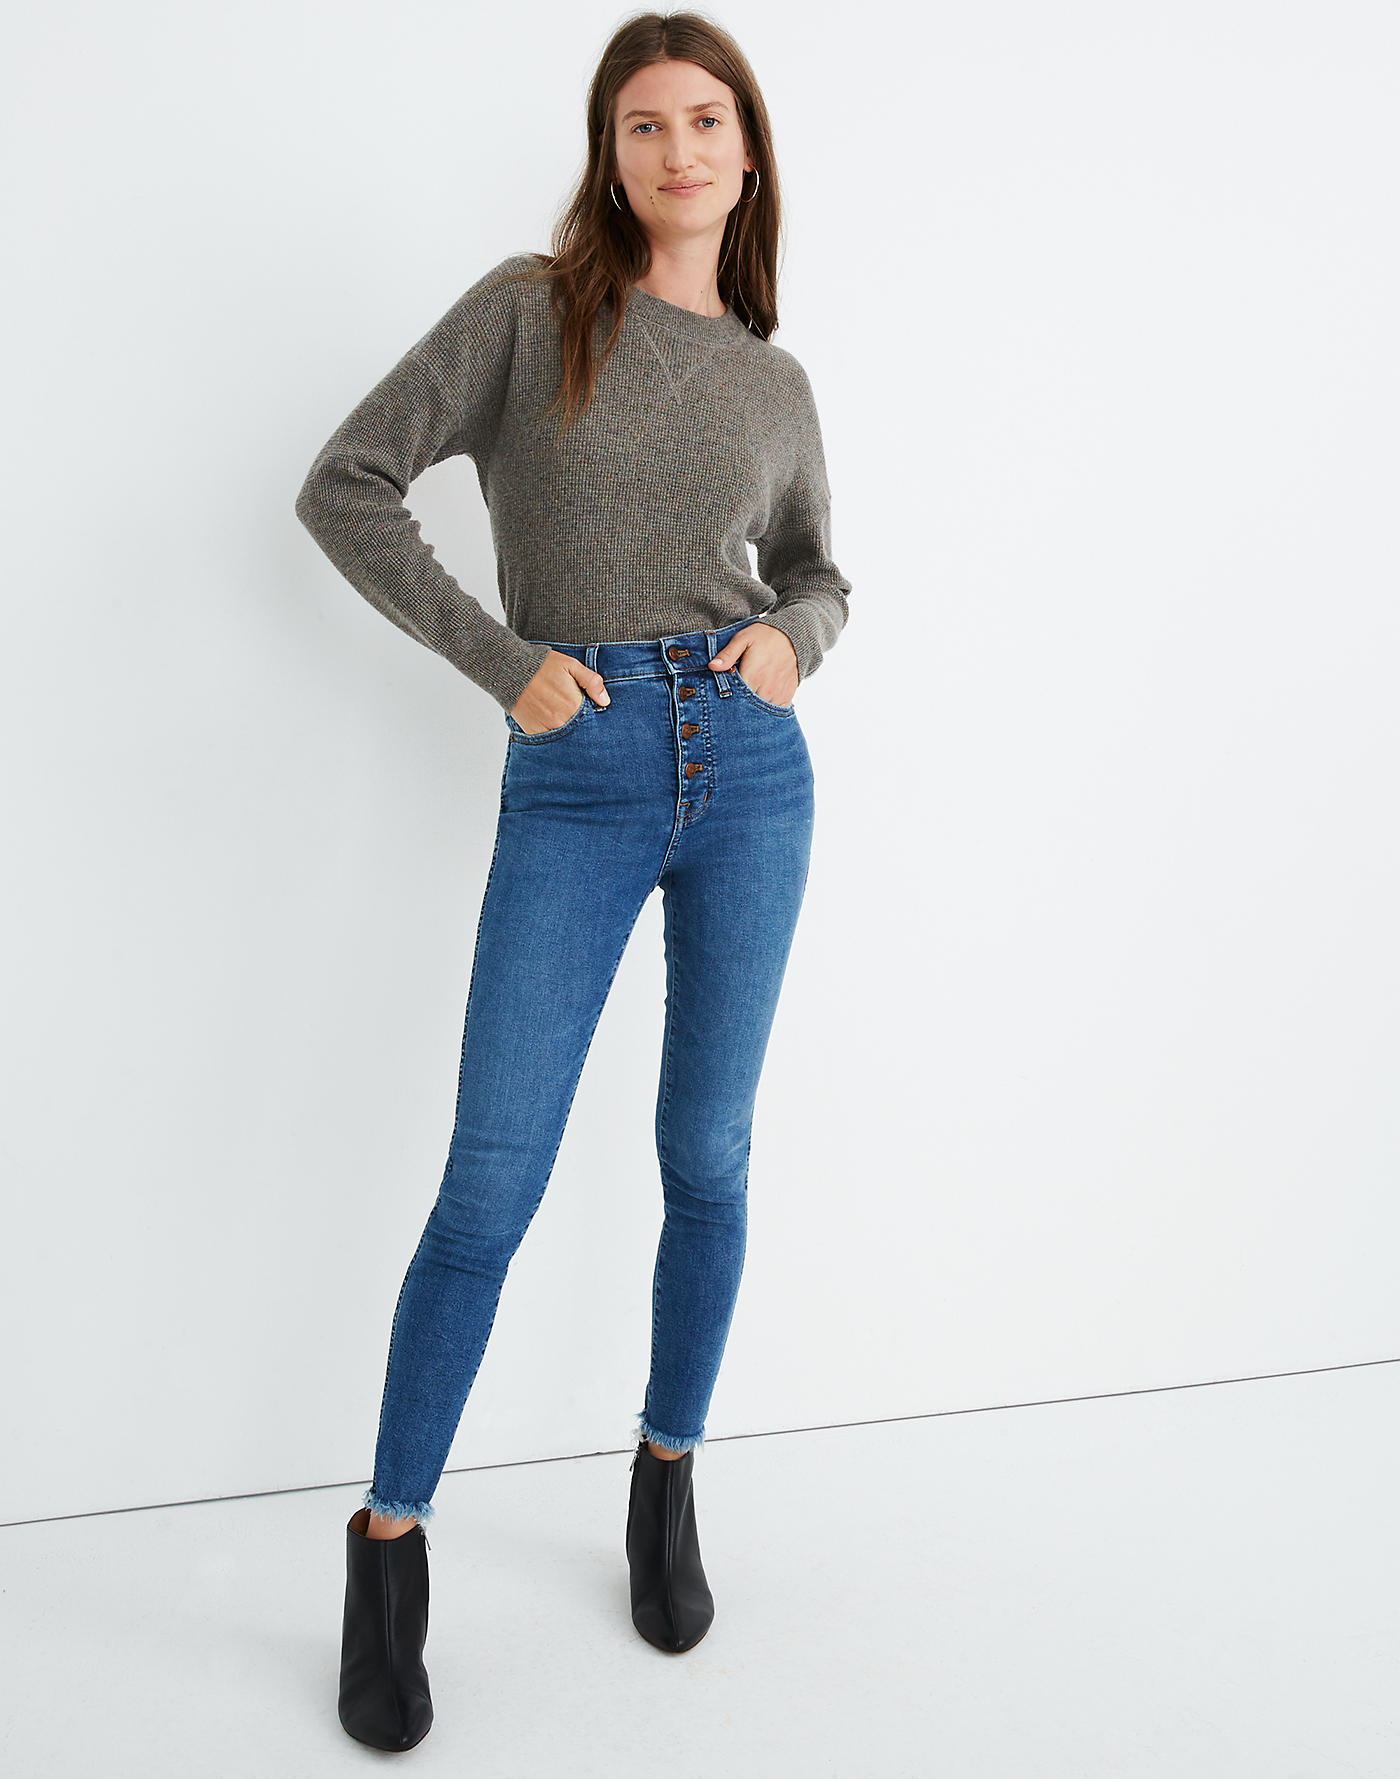 6 Cute and Simple Skinny-Jean Outfits Everyone Can Pull Off | Who What Wear